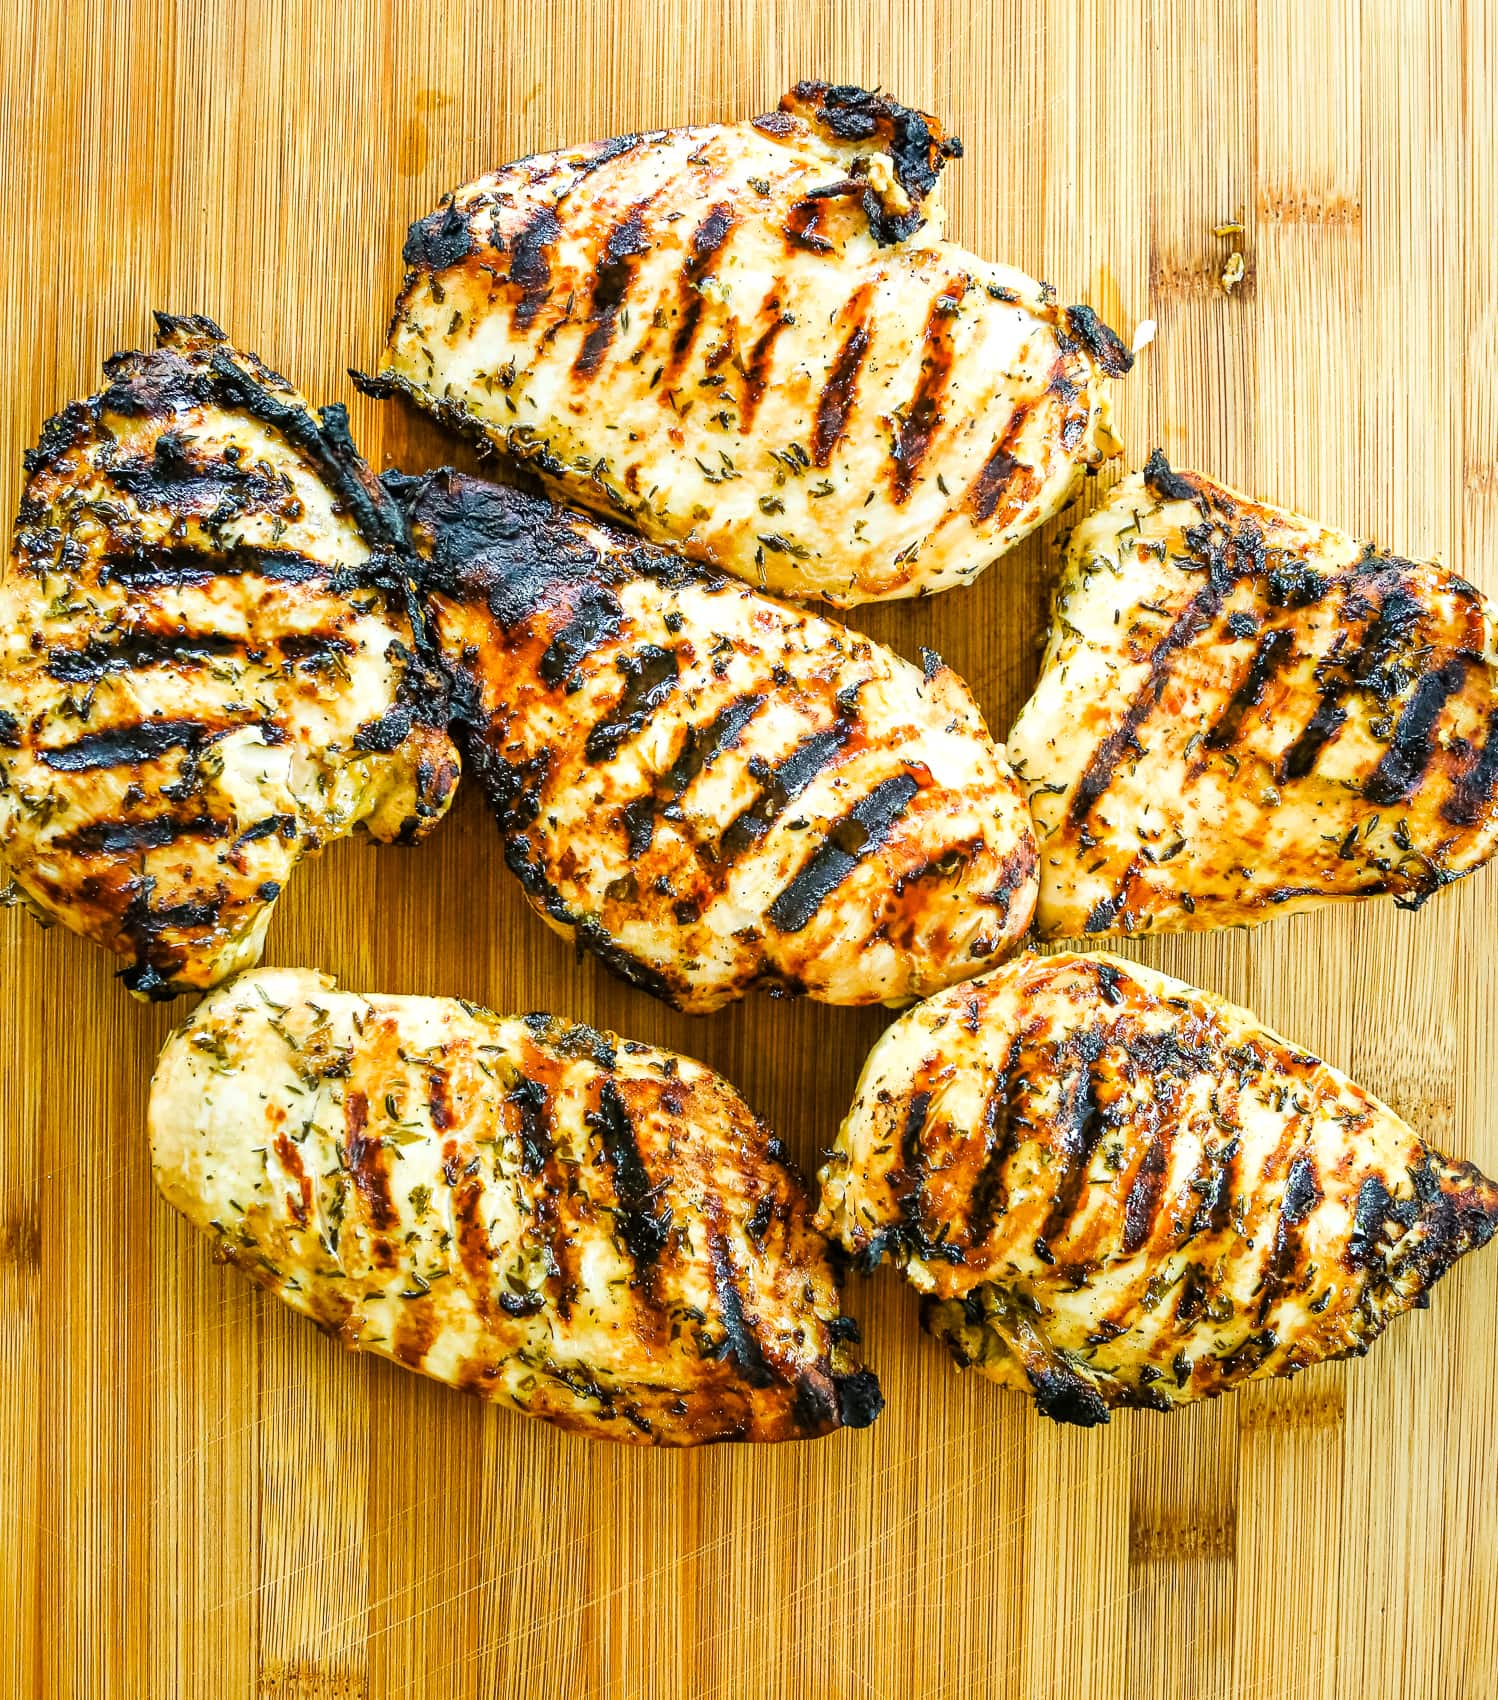 6 chicken breasts with grill marks on a cutting board